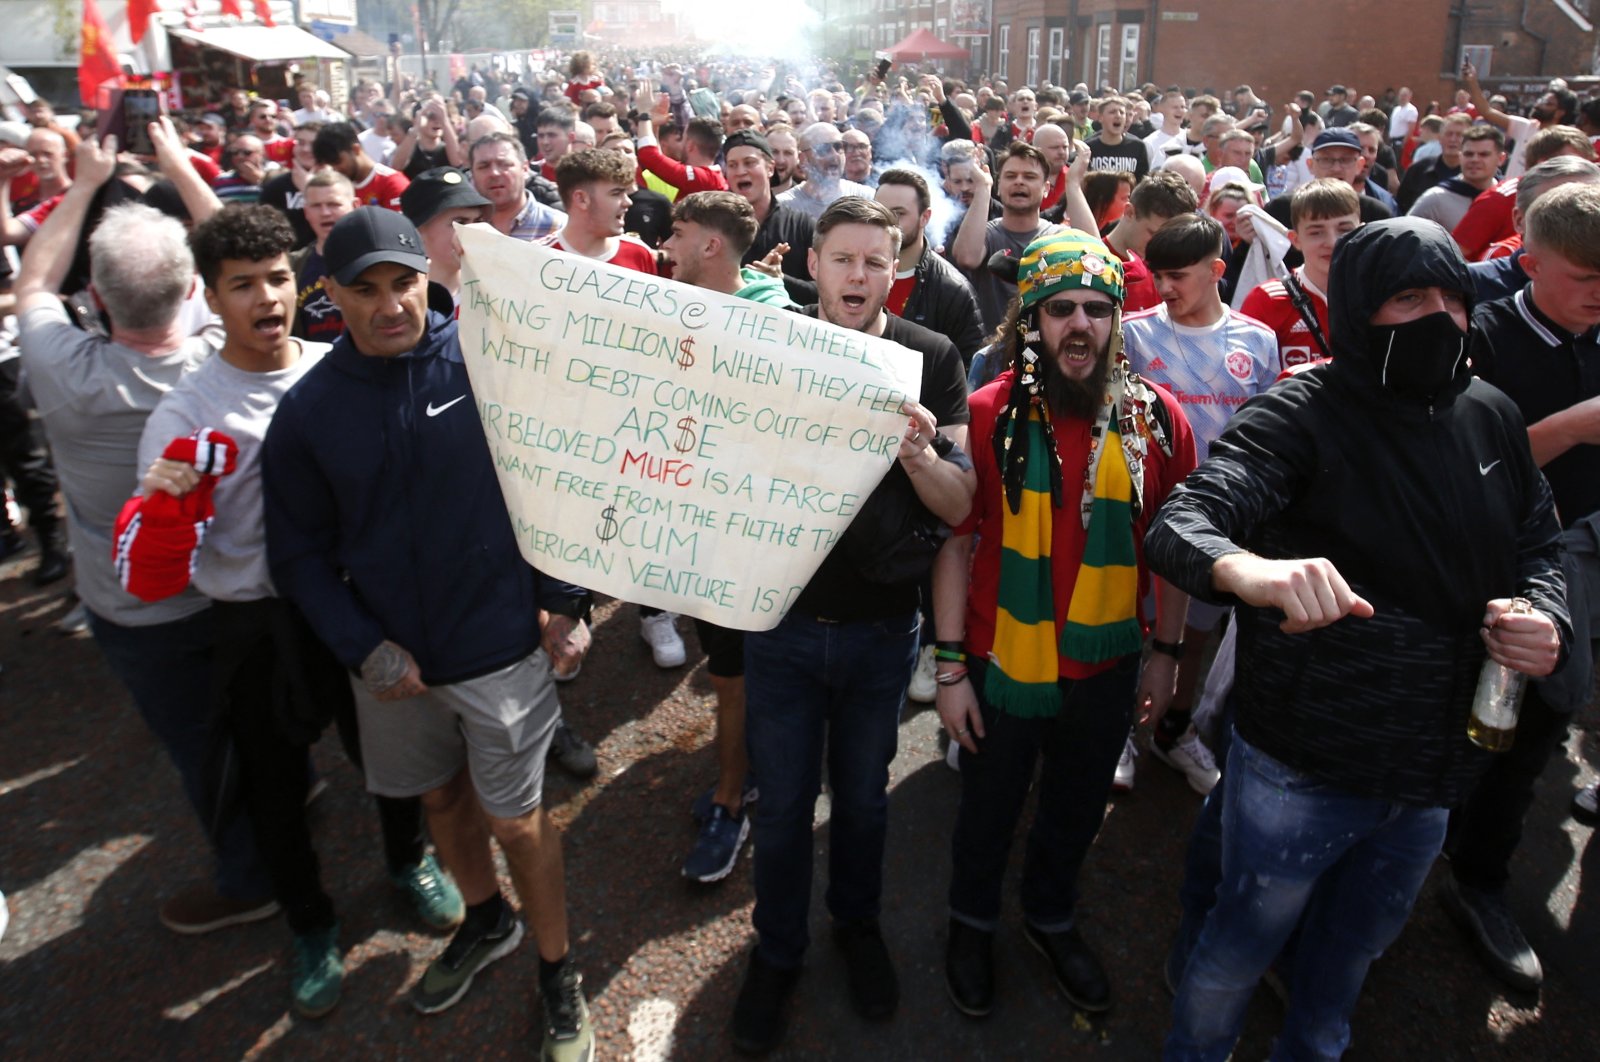 Manchester United fans march while displaying banners in protest of the Glazer family’s ownership of the club outside the stadium before the match, Old Trafford, Manchester, Britain, April 16, 2022.  (Reuters Photo)